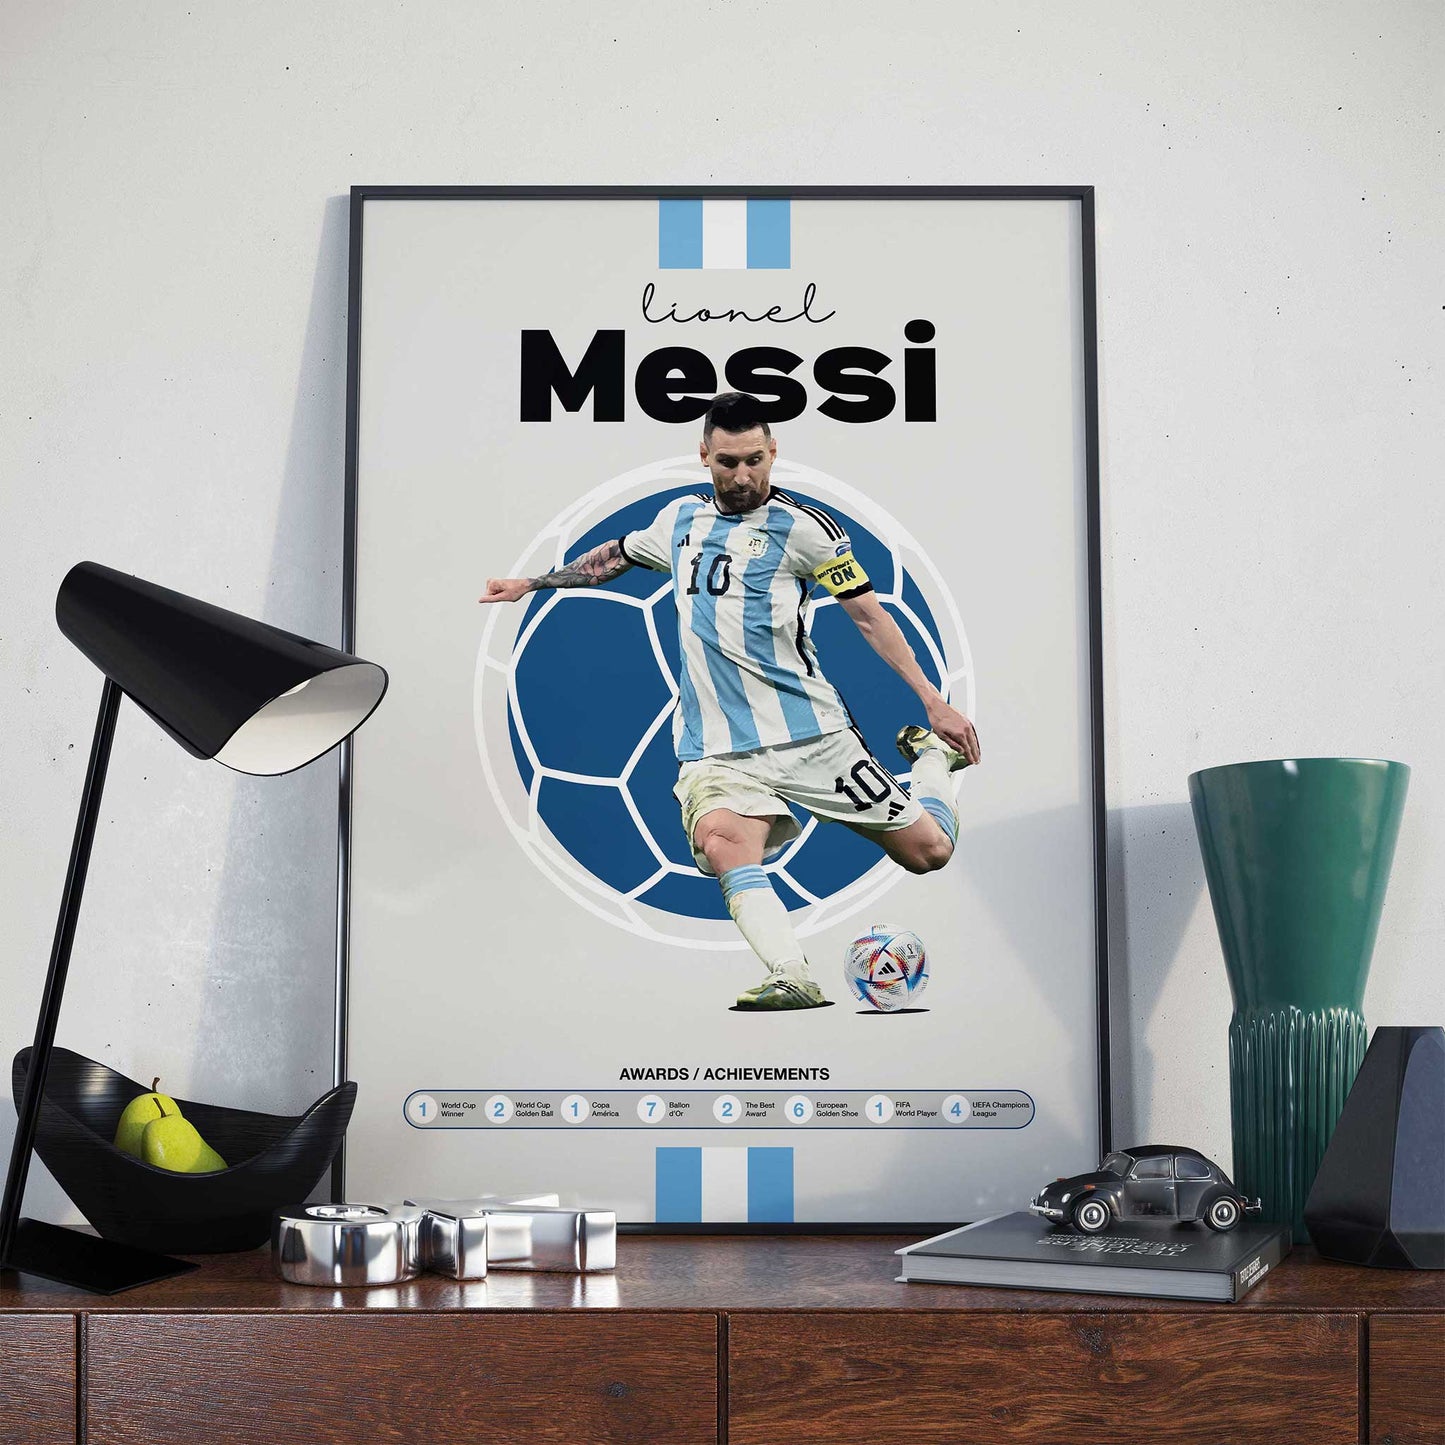 Lionel Messi - Legendary Player Profile Football Poster